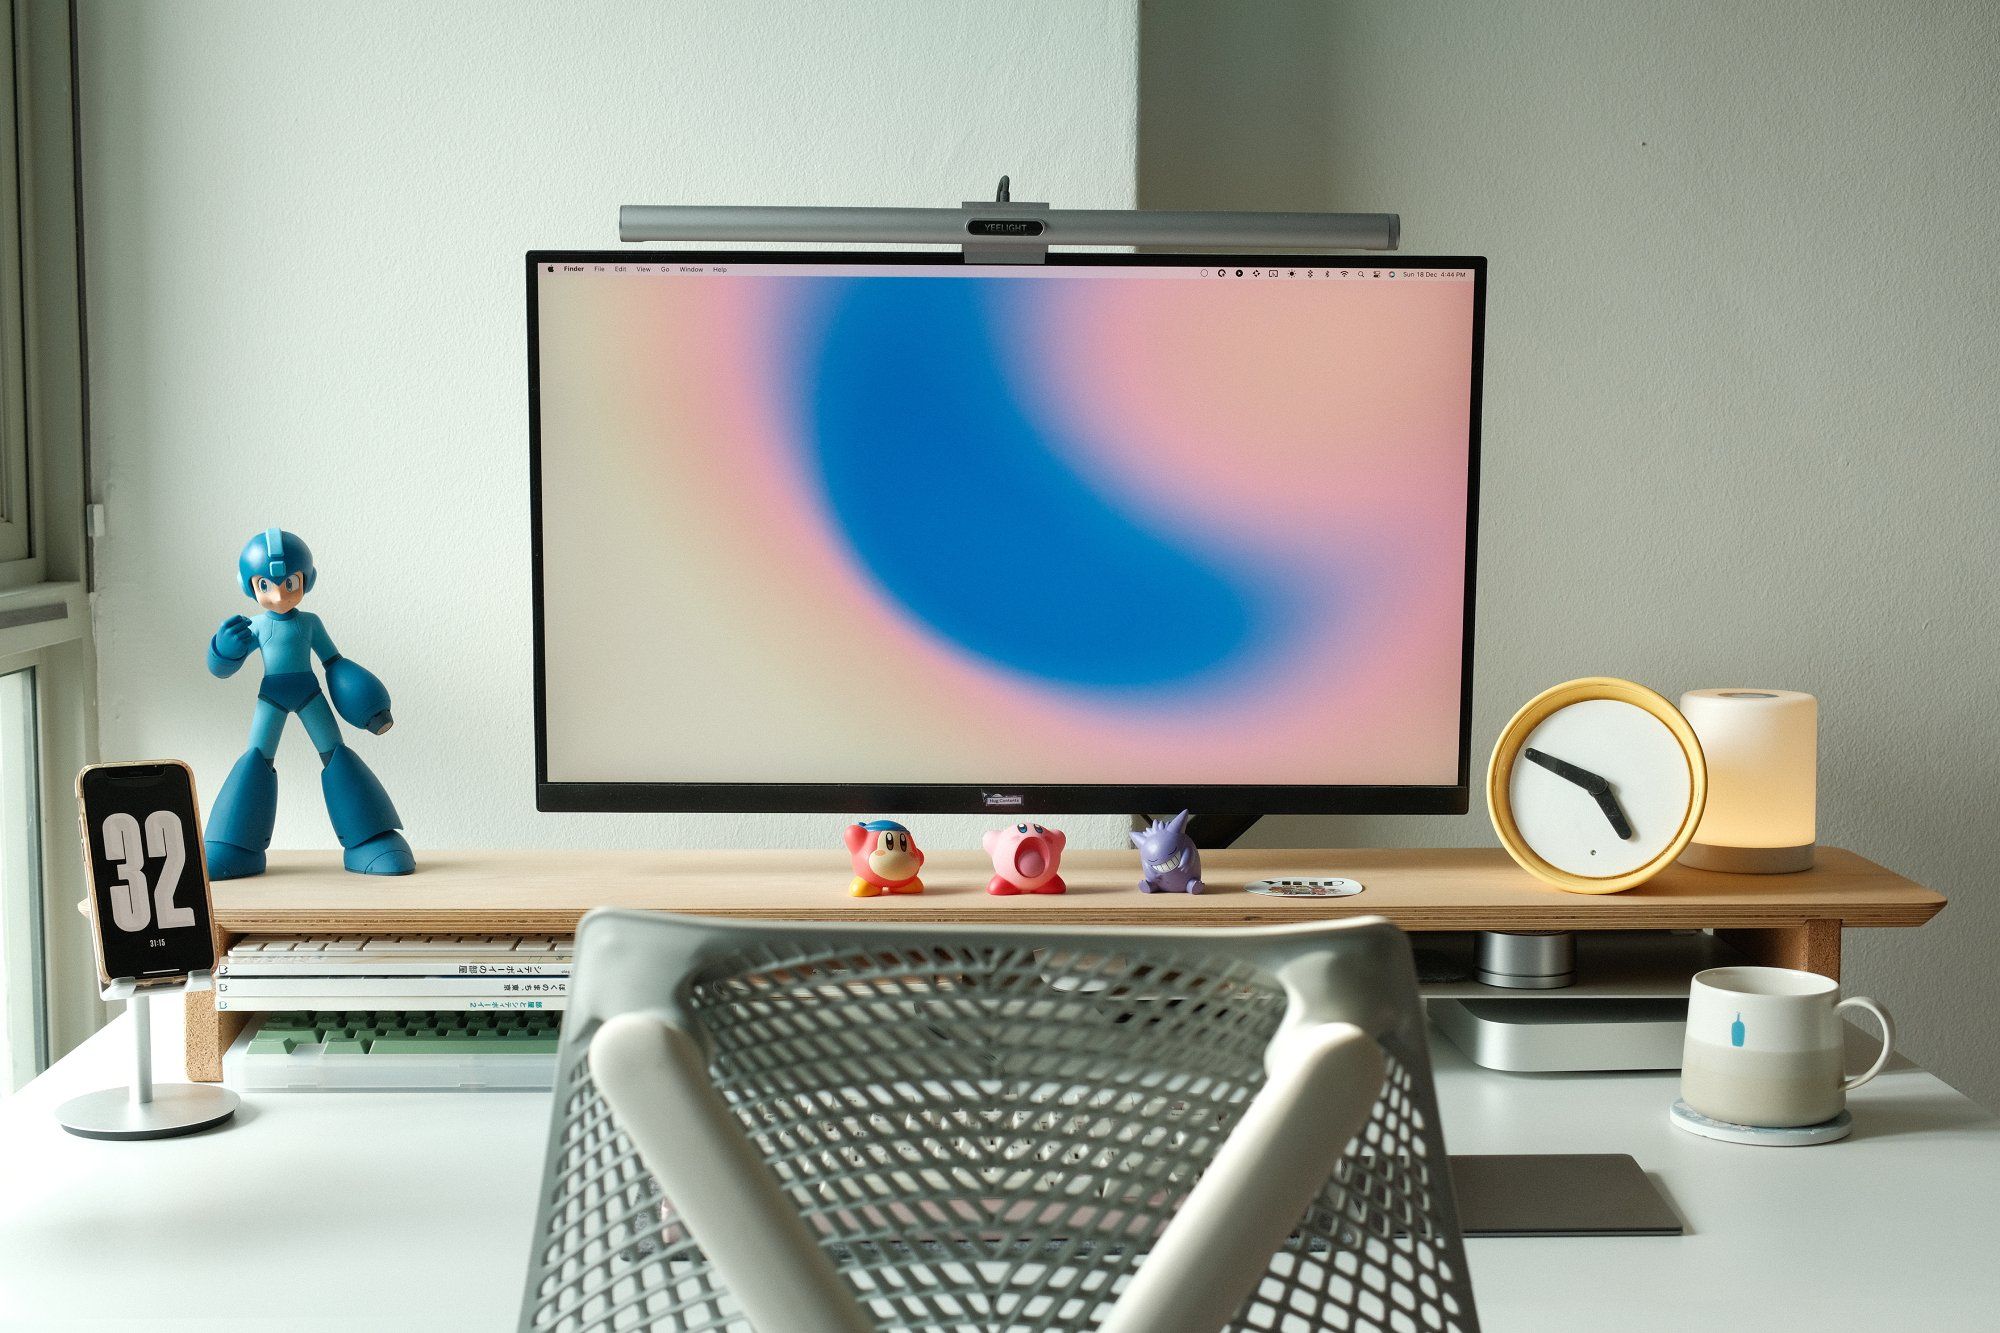 A minimal desk setup featuring an LG monitor, a Herman Miller Sayl chair, and a branded Blue Bottle coffeshop mug